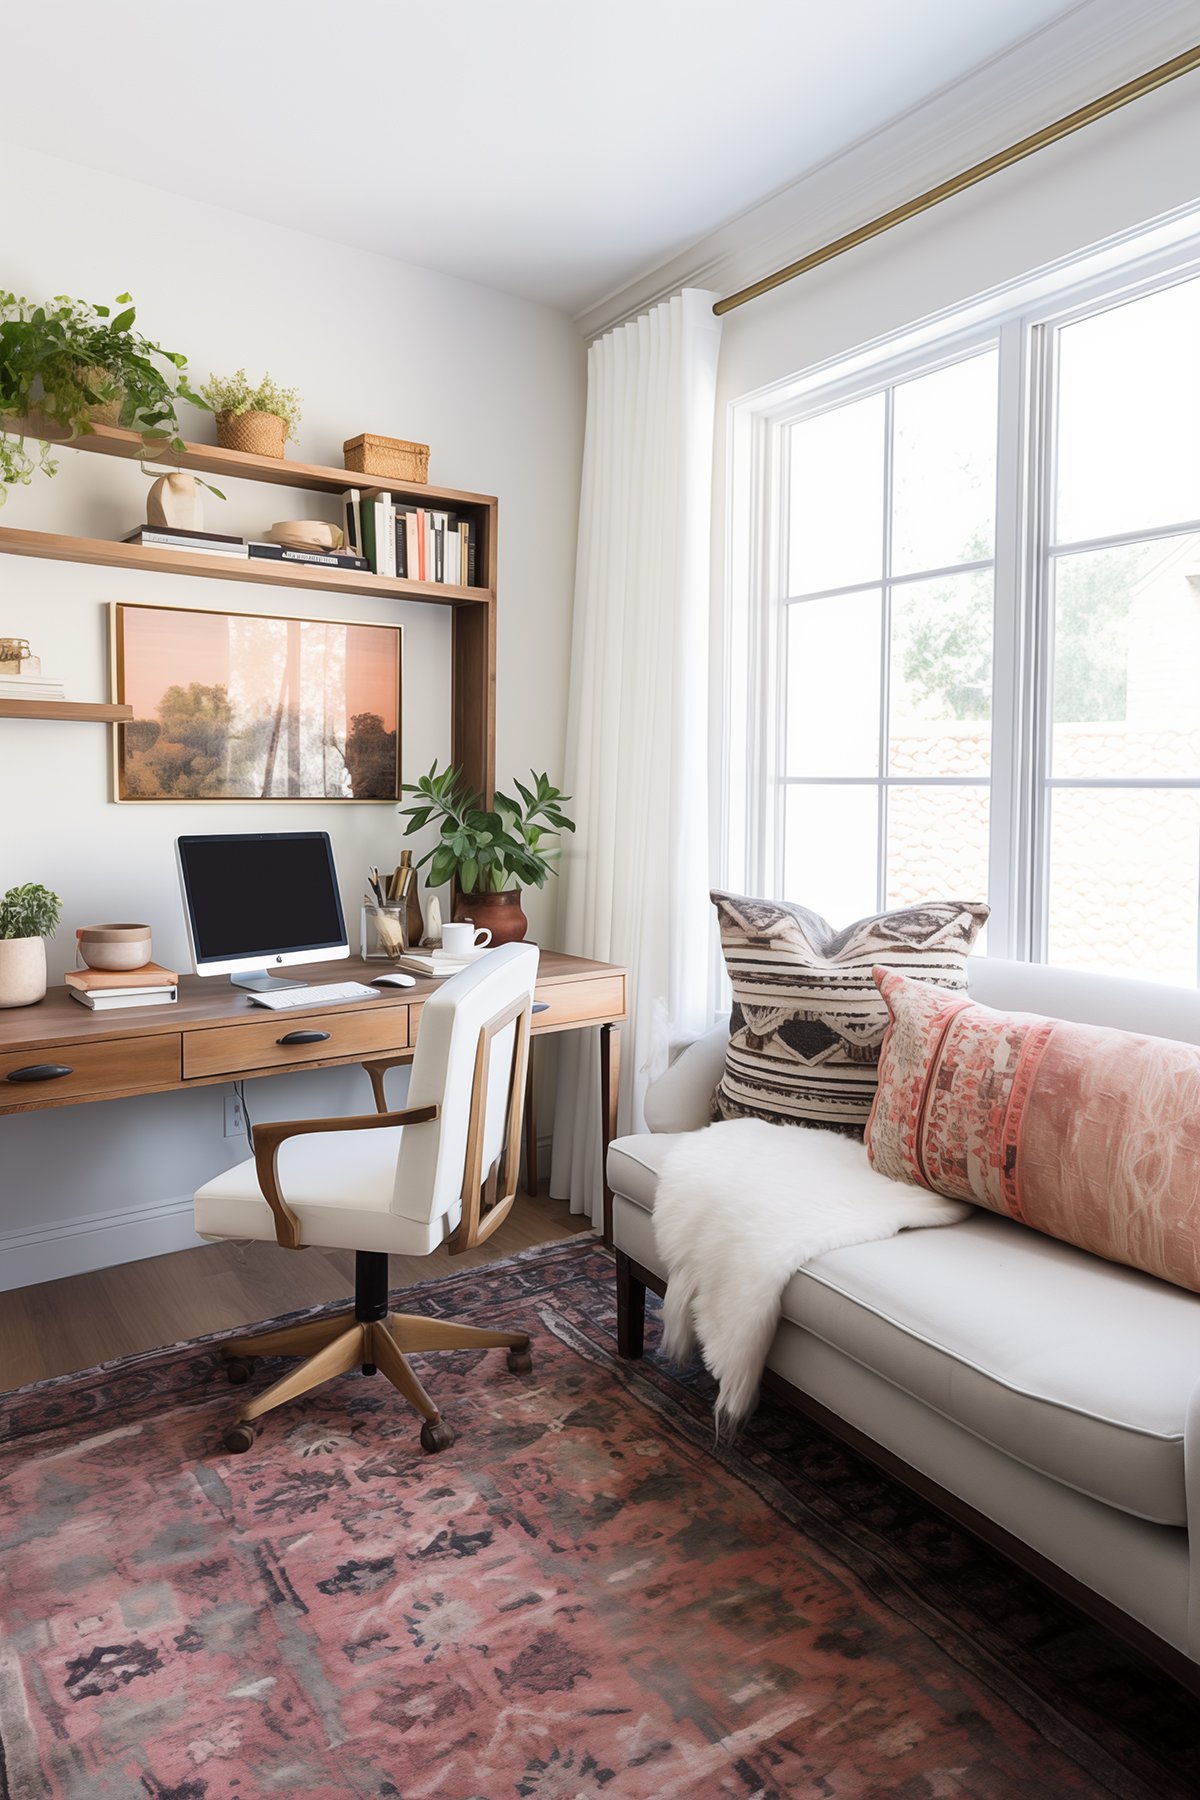 Boho-chic styled home office with a wooden desk, white chair, open shelves, a cozy couch with pillows, and a patterned rug